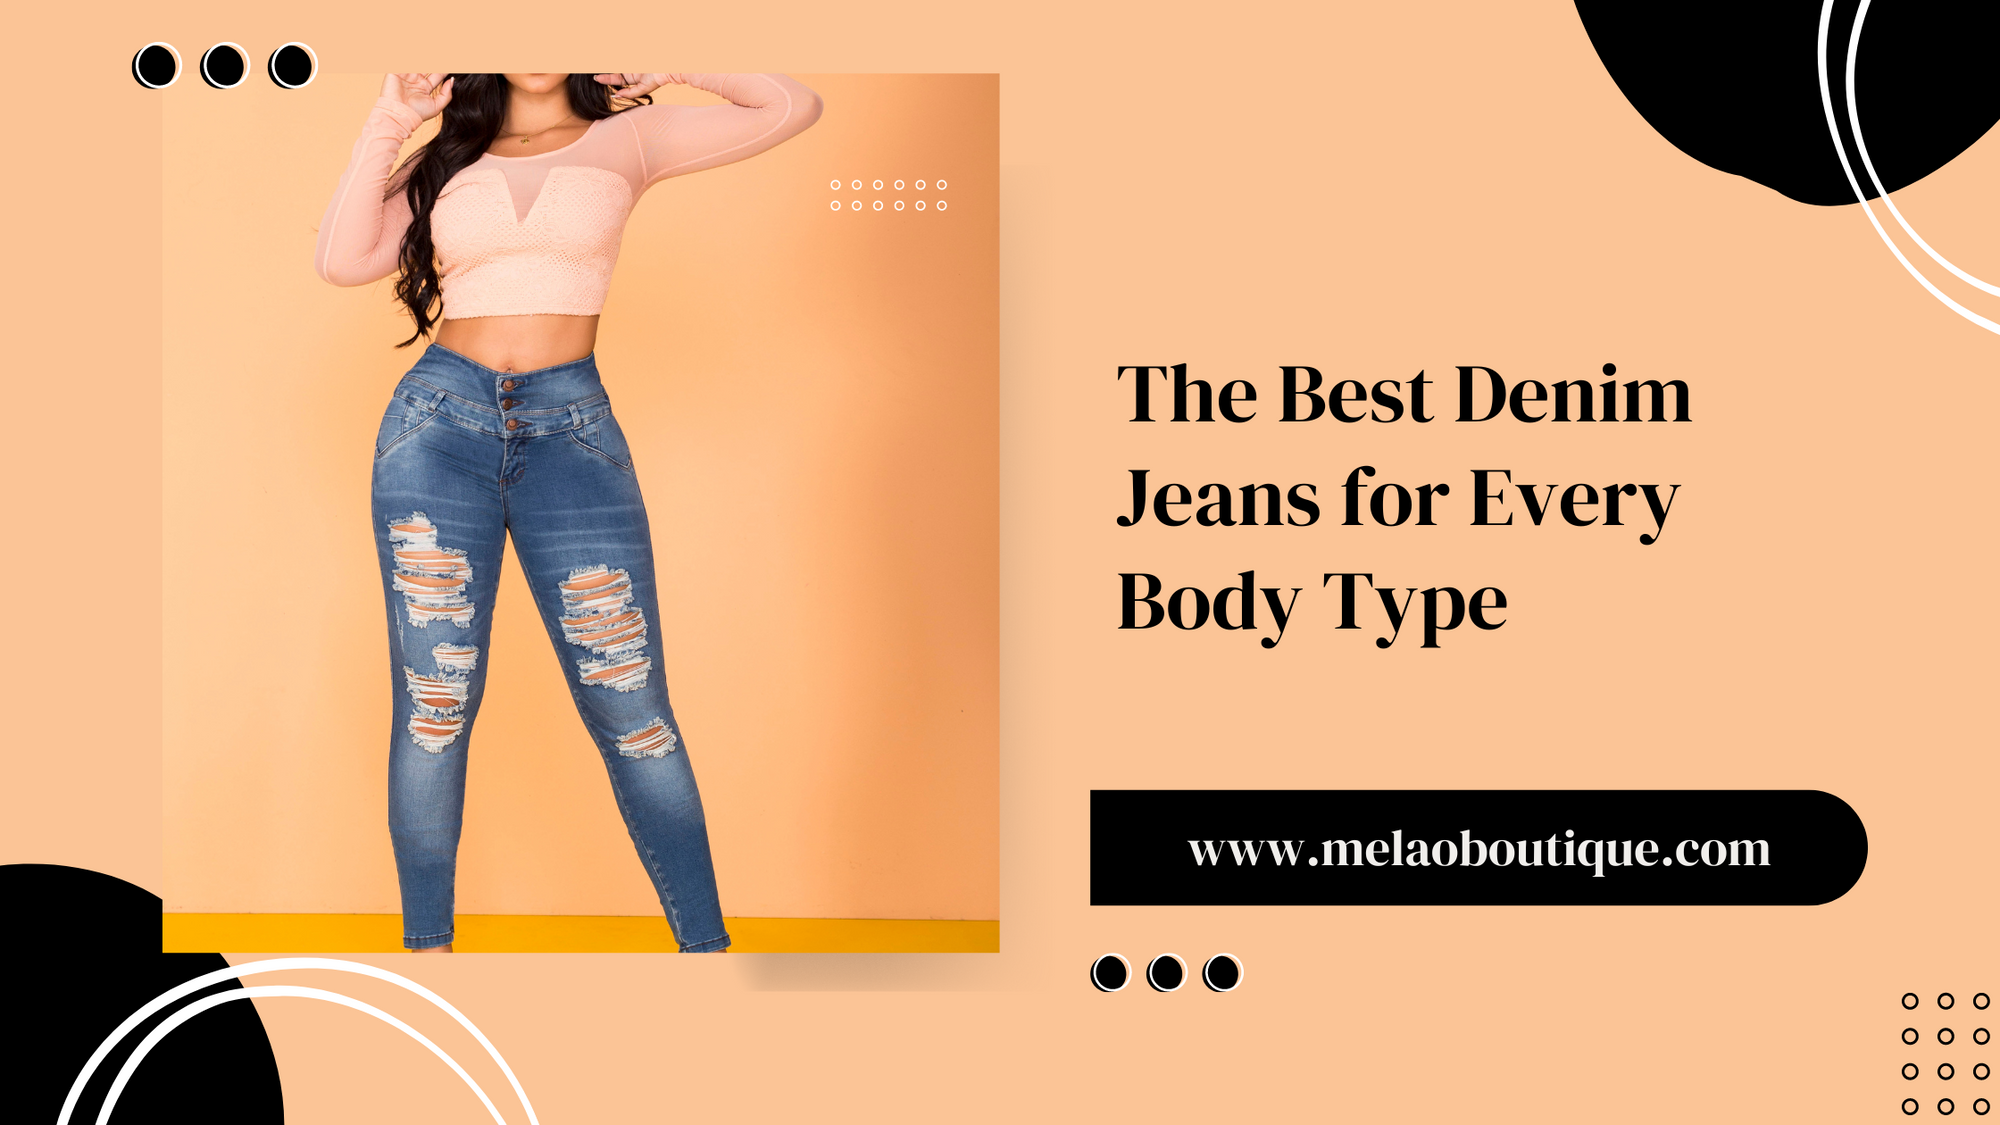 The Best Denim Jeans for Every Body Type